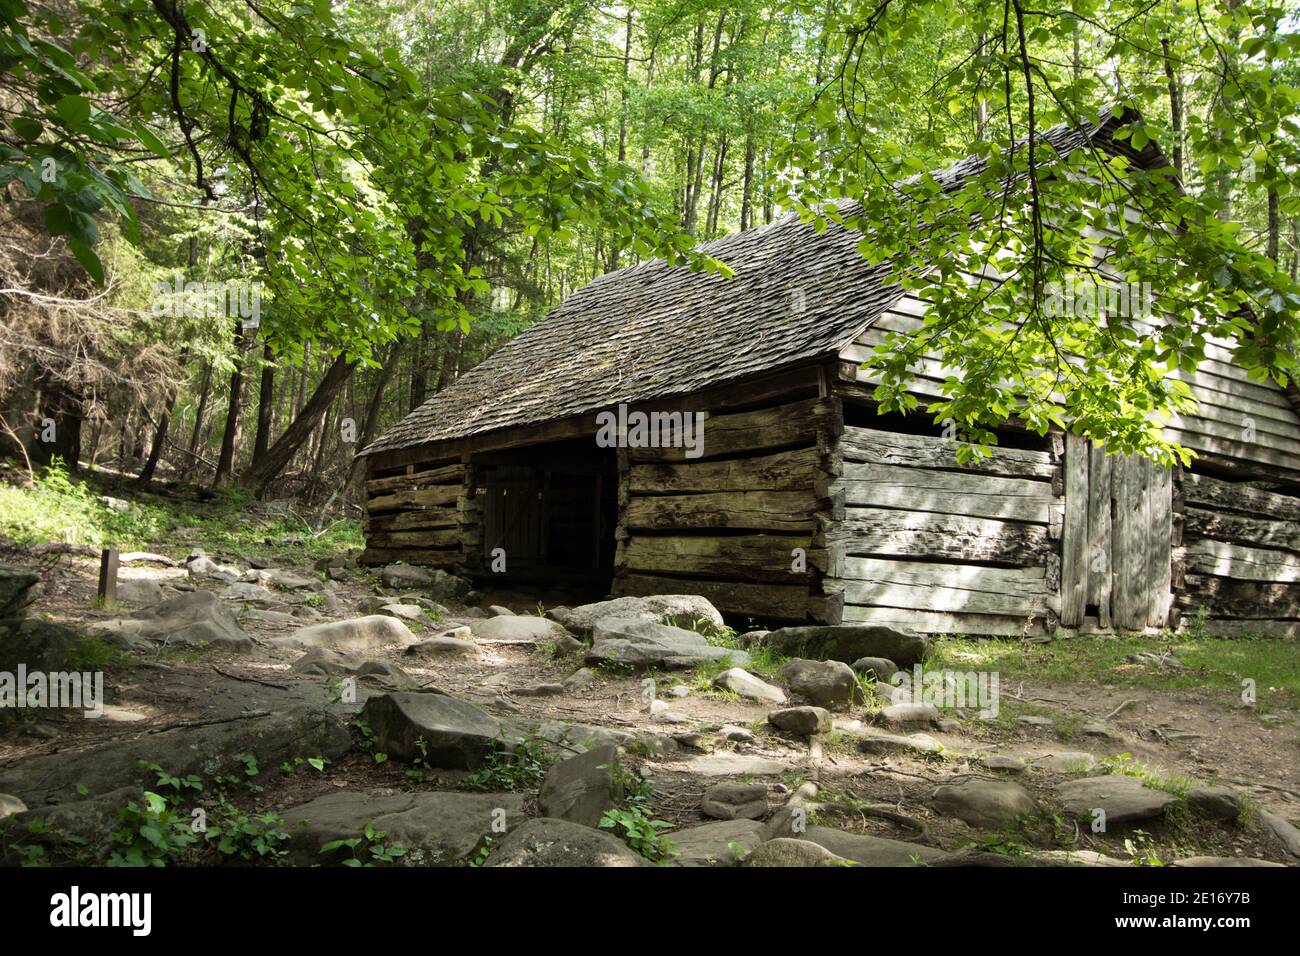 Historical wooden barn on display in the Great Smoky Mountains National Park on the Roaring Fork Motor Nature Trail. Gatlinburg, Tennessee. Stock Photo